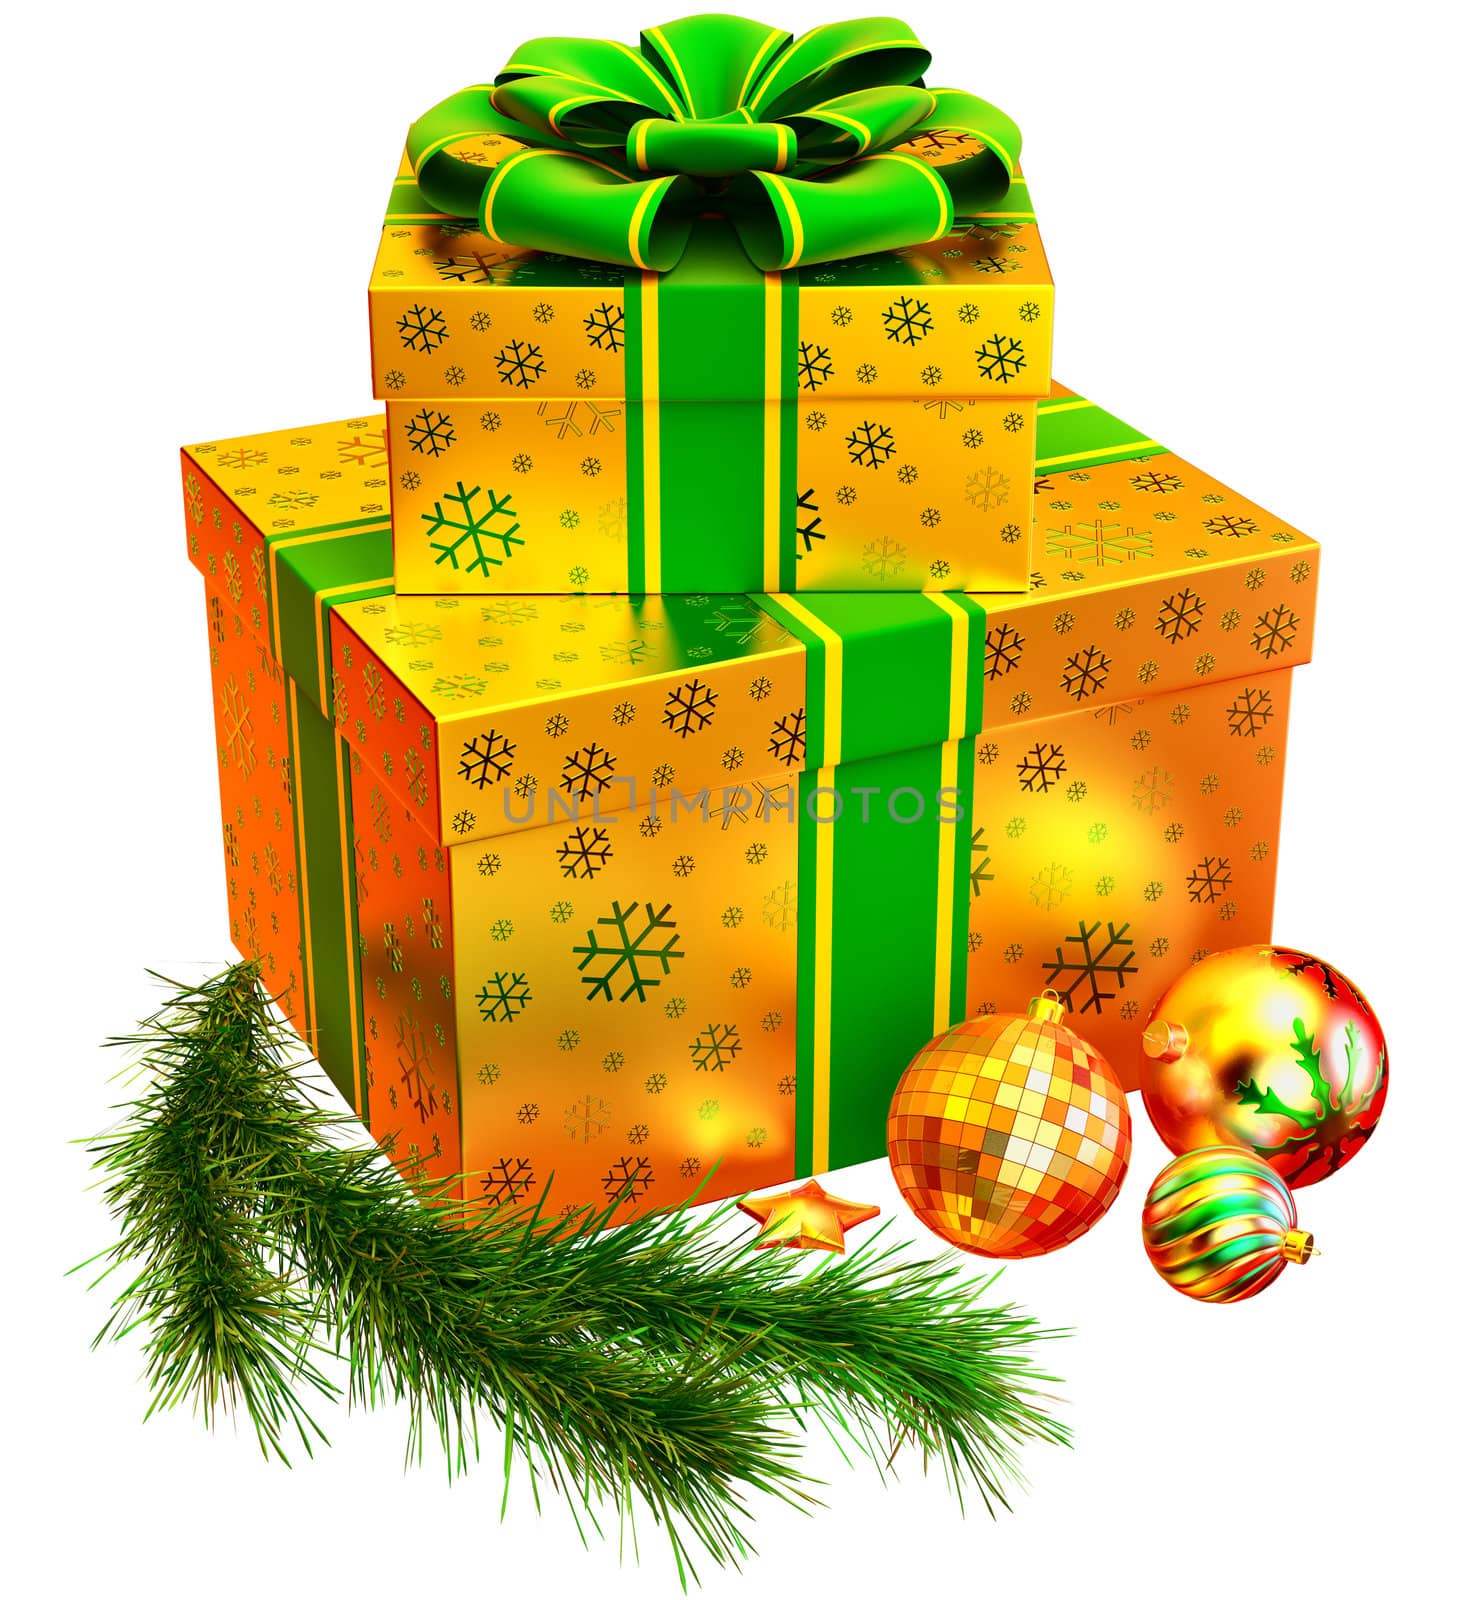 Christmas tree toys and set of golden boxes ornamented with the snowflakes and decorated by green bow as gifts